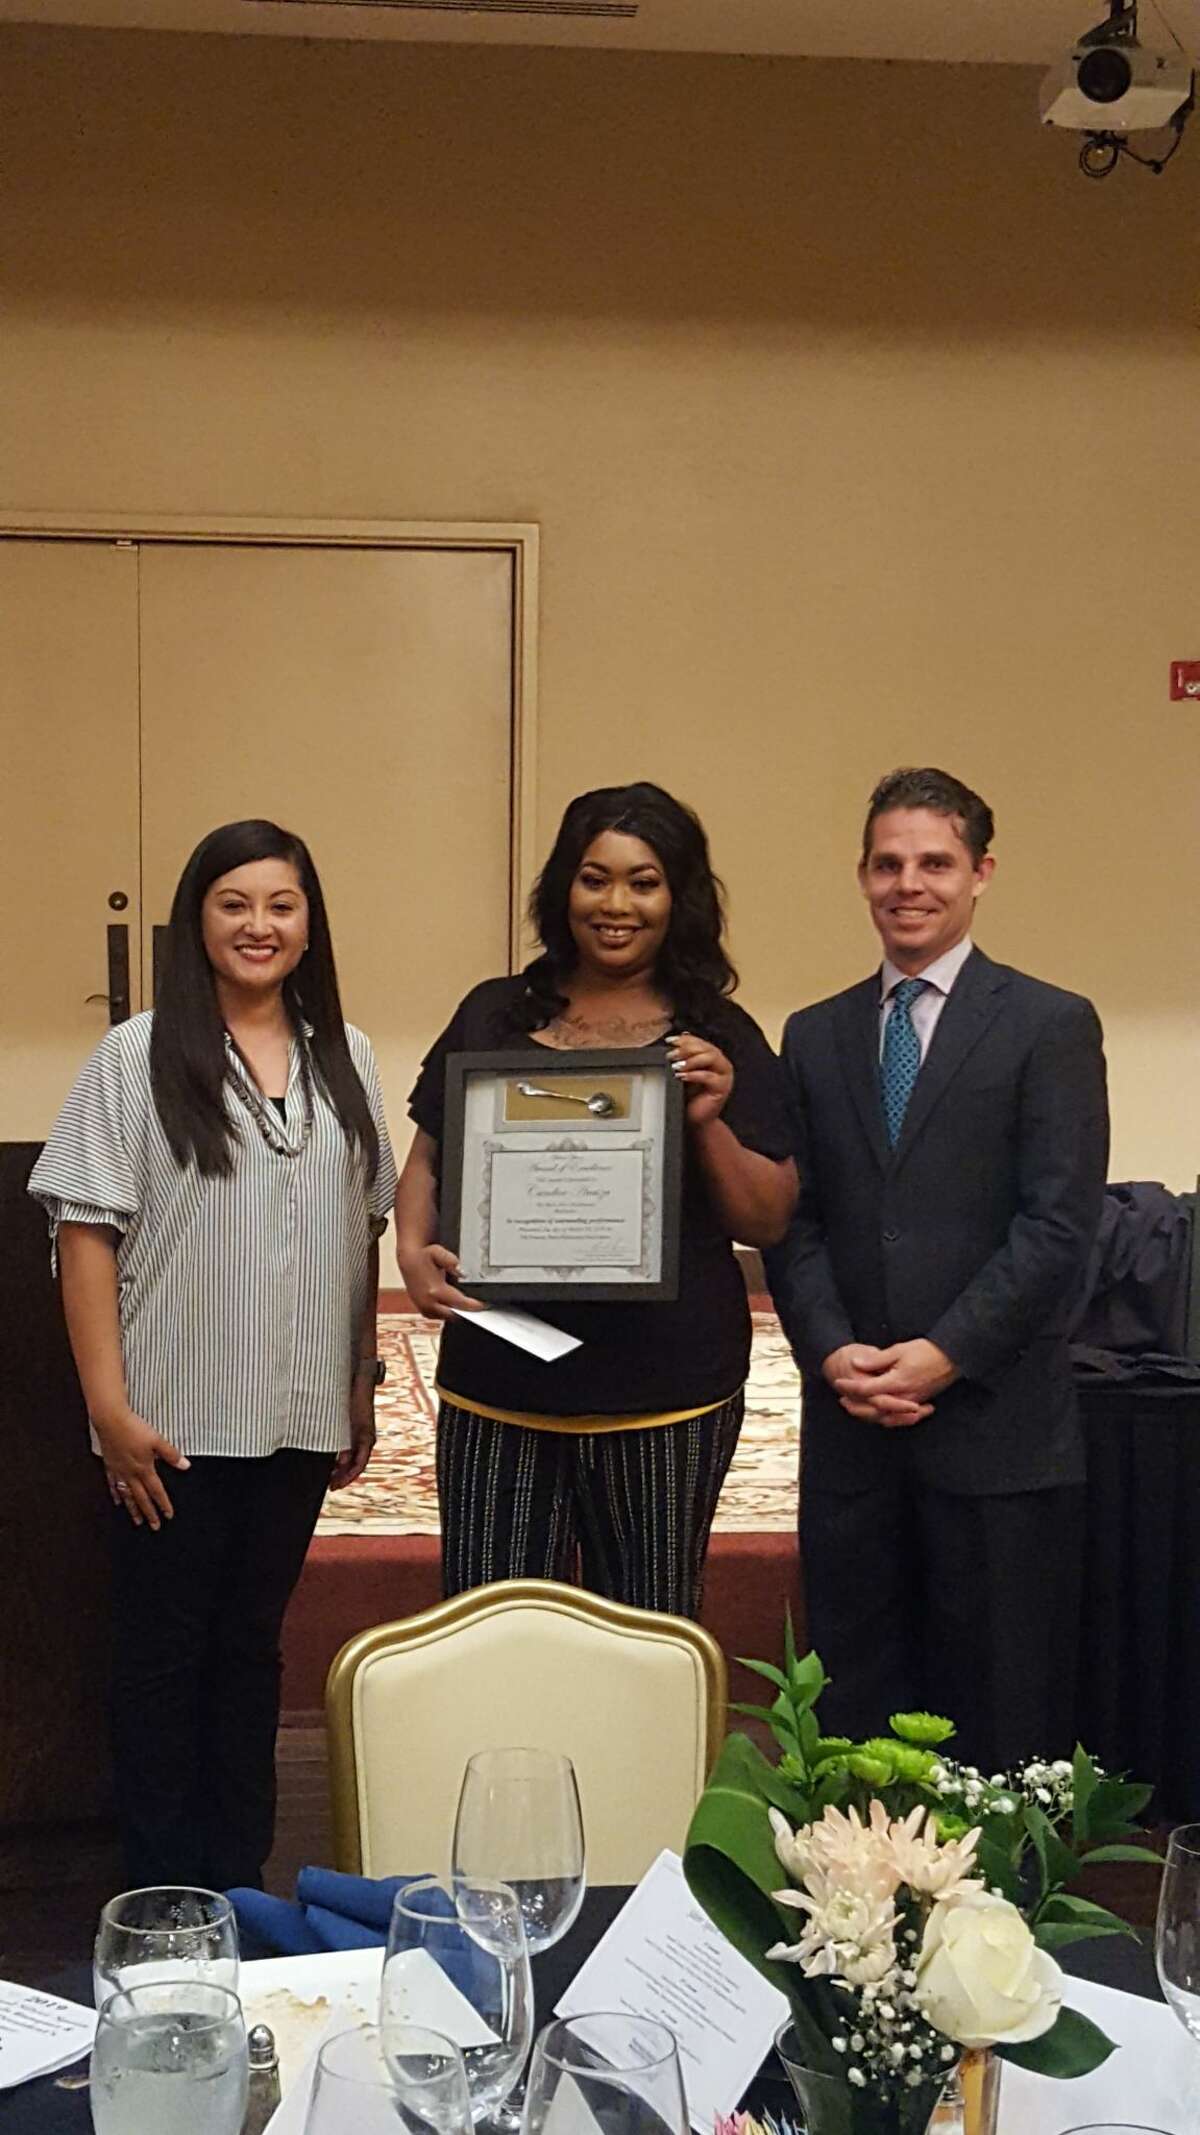 The 2019 Silver Spoon Awards were held in conjunction with the Permian Basin Restaurant Association banquet. Candace Araiza accepts the Bartender award for The Barn Door.